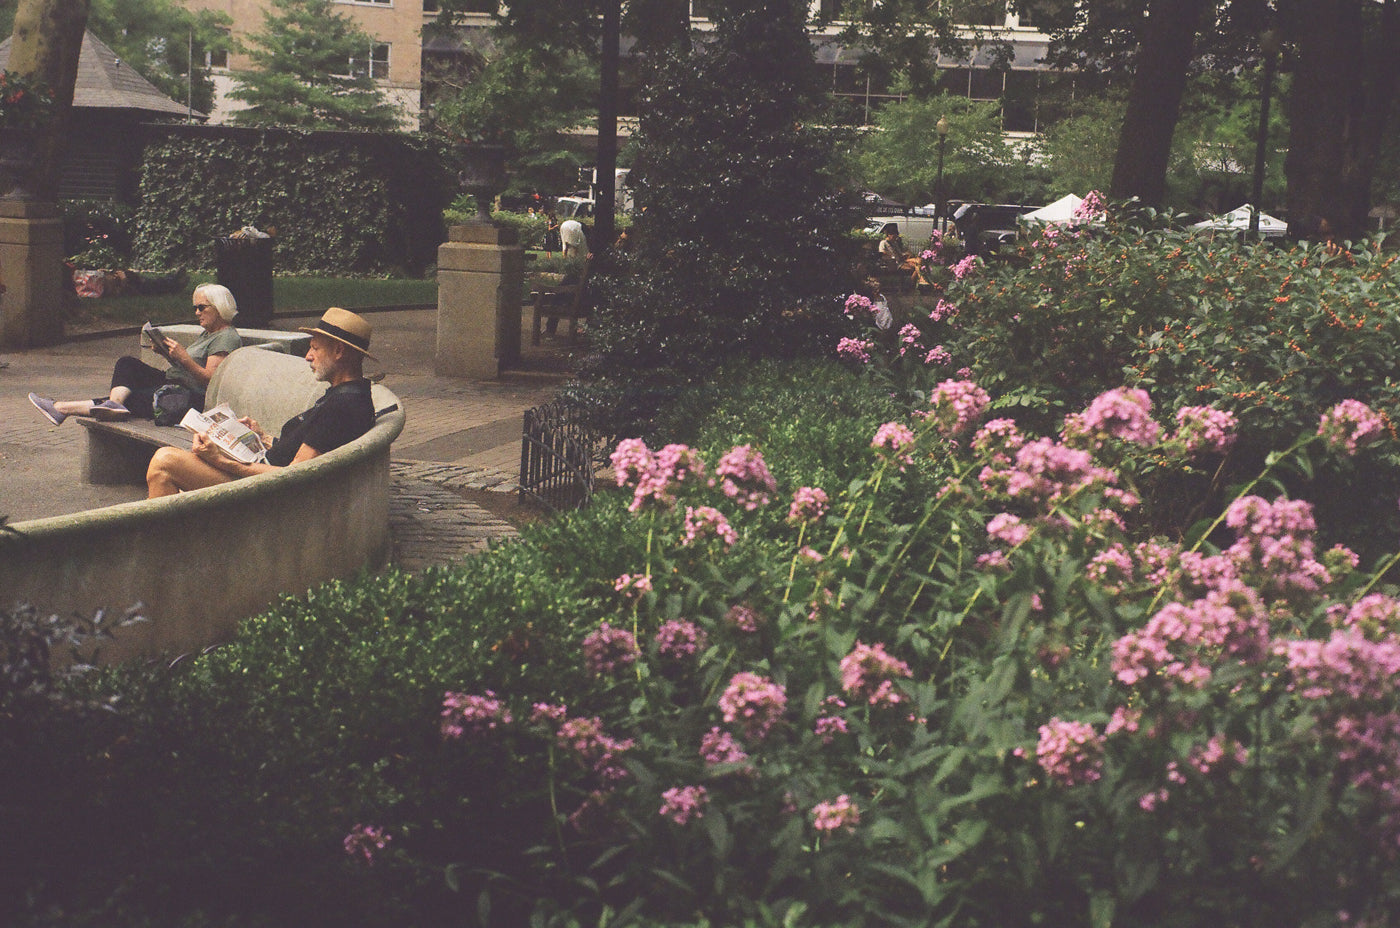 Photograph of flowers and people in Rittenhouse Park in Philadelphia